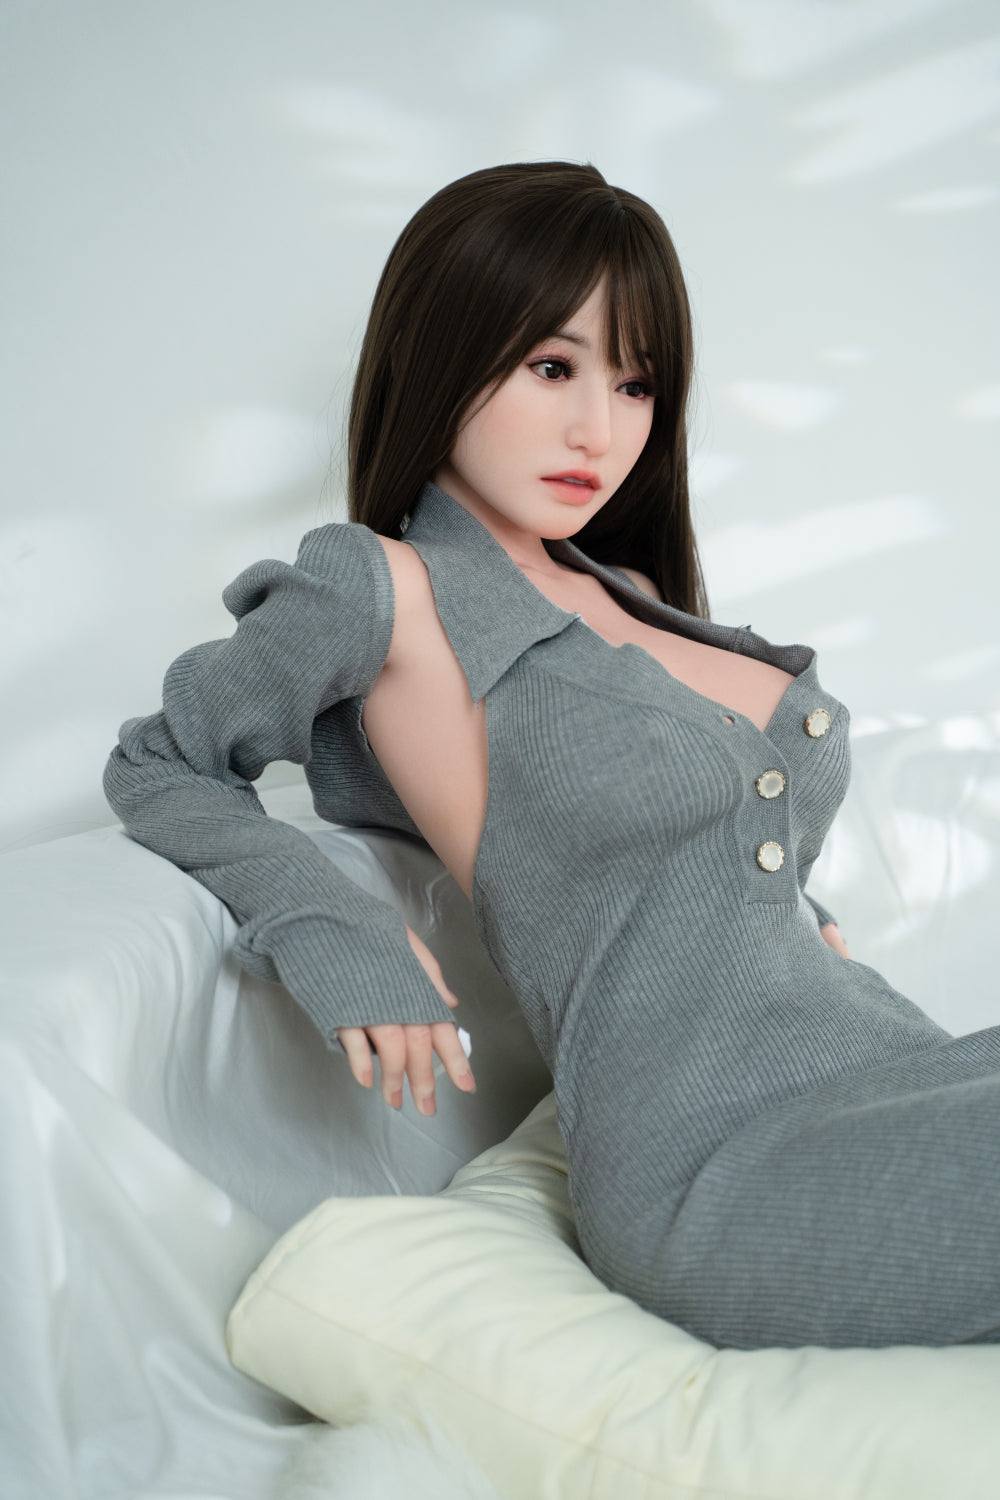 TAYU Doll 148 cm D Silicone - Angel Meng | Buy Sex Dolls at DOLLS ACTUALLY